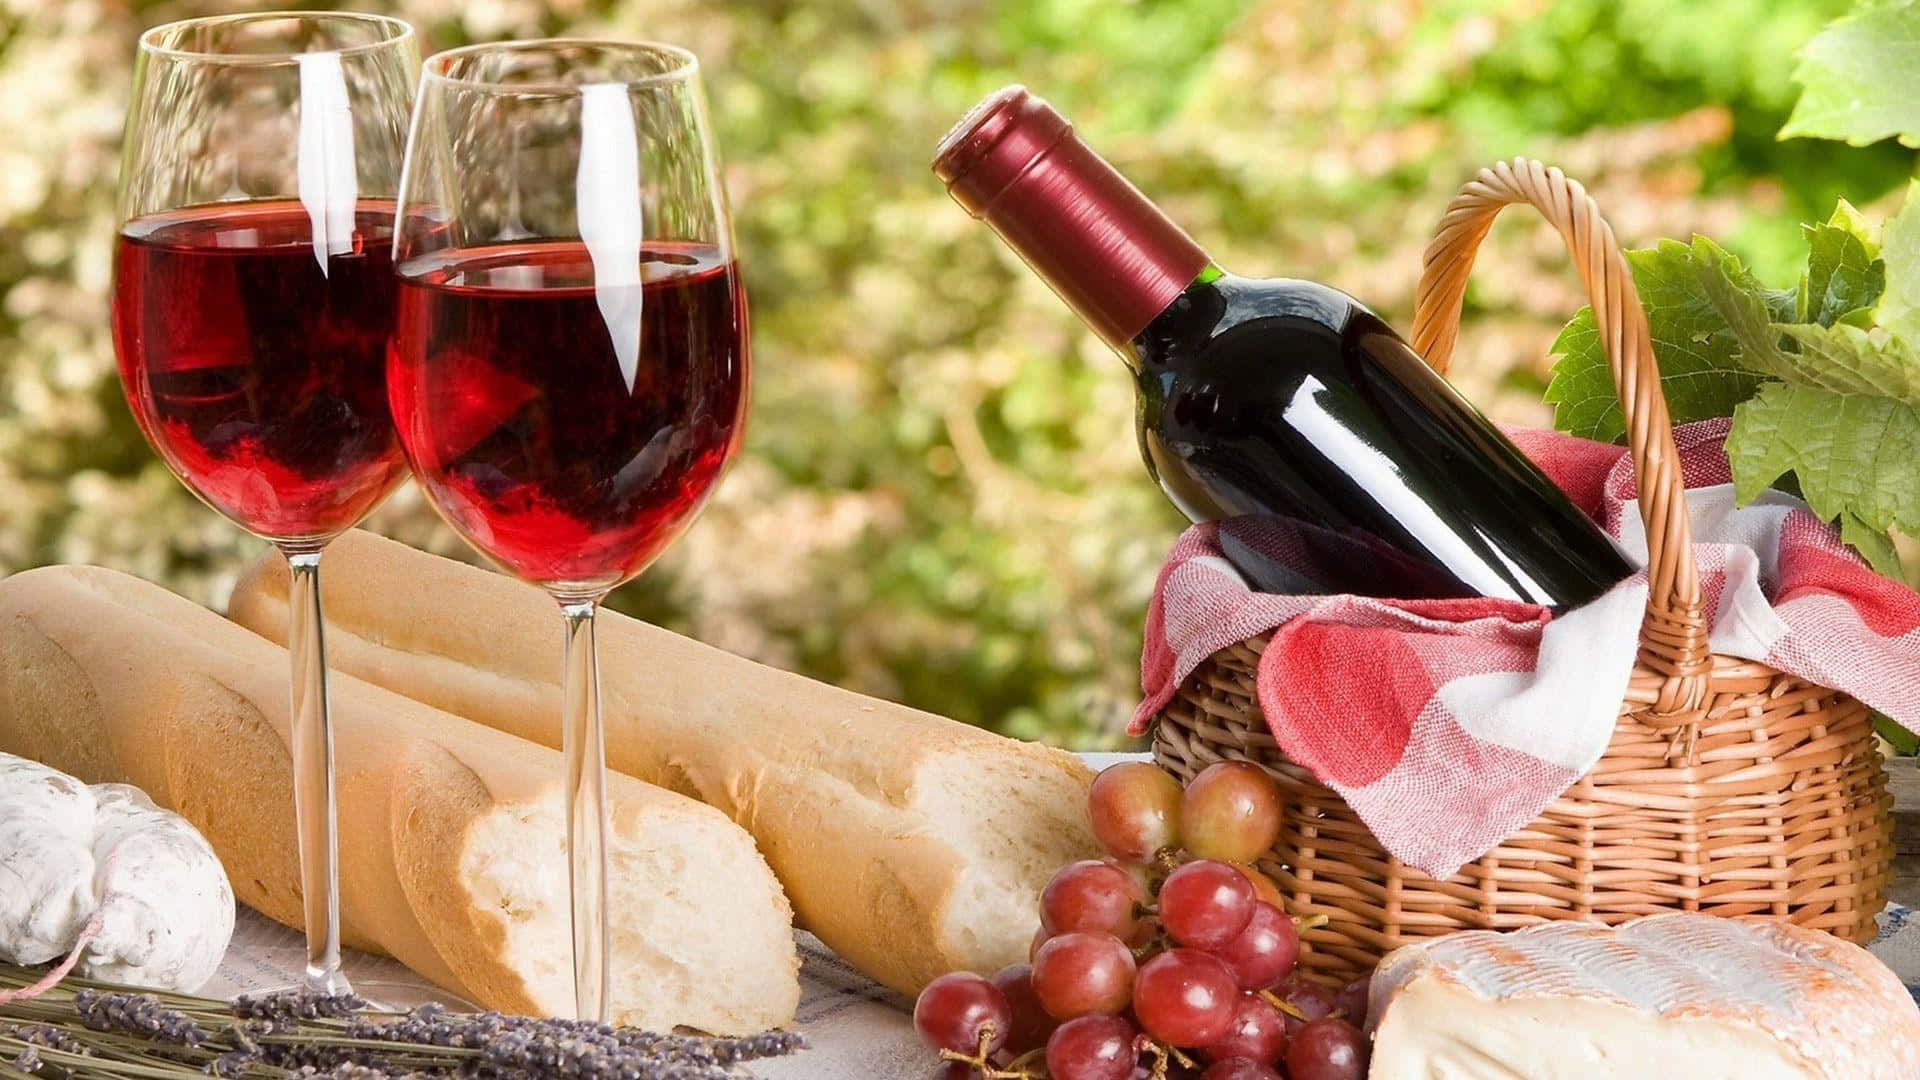 Picnic Set Up With Wine Picture